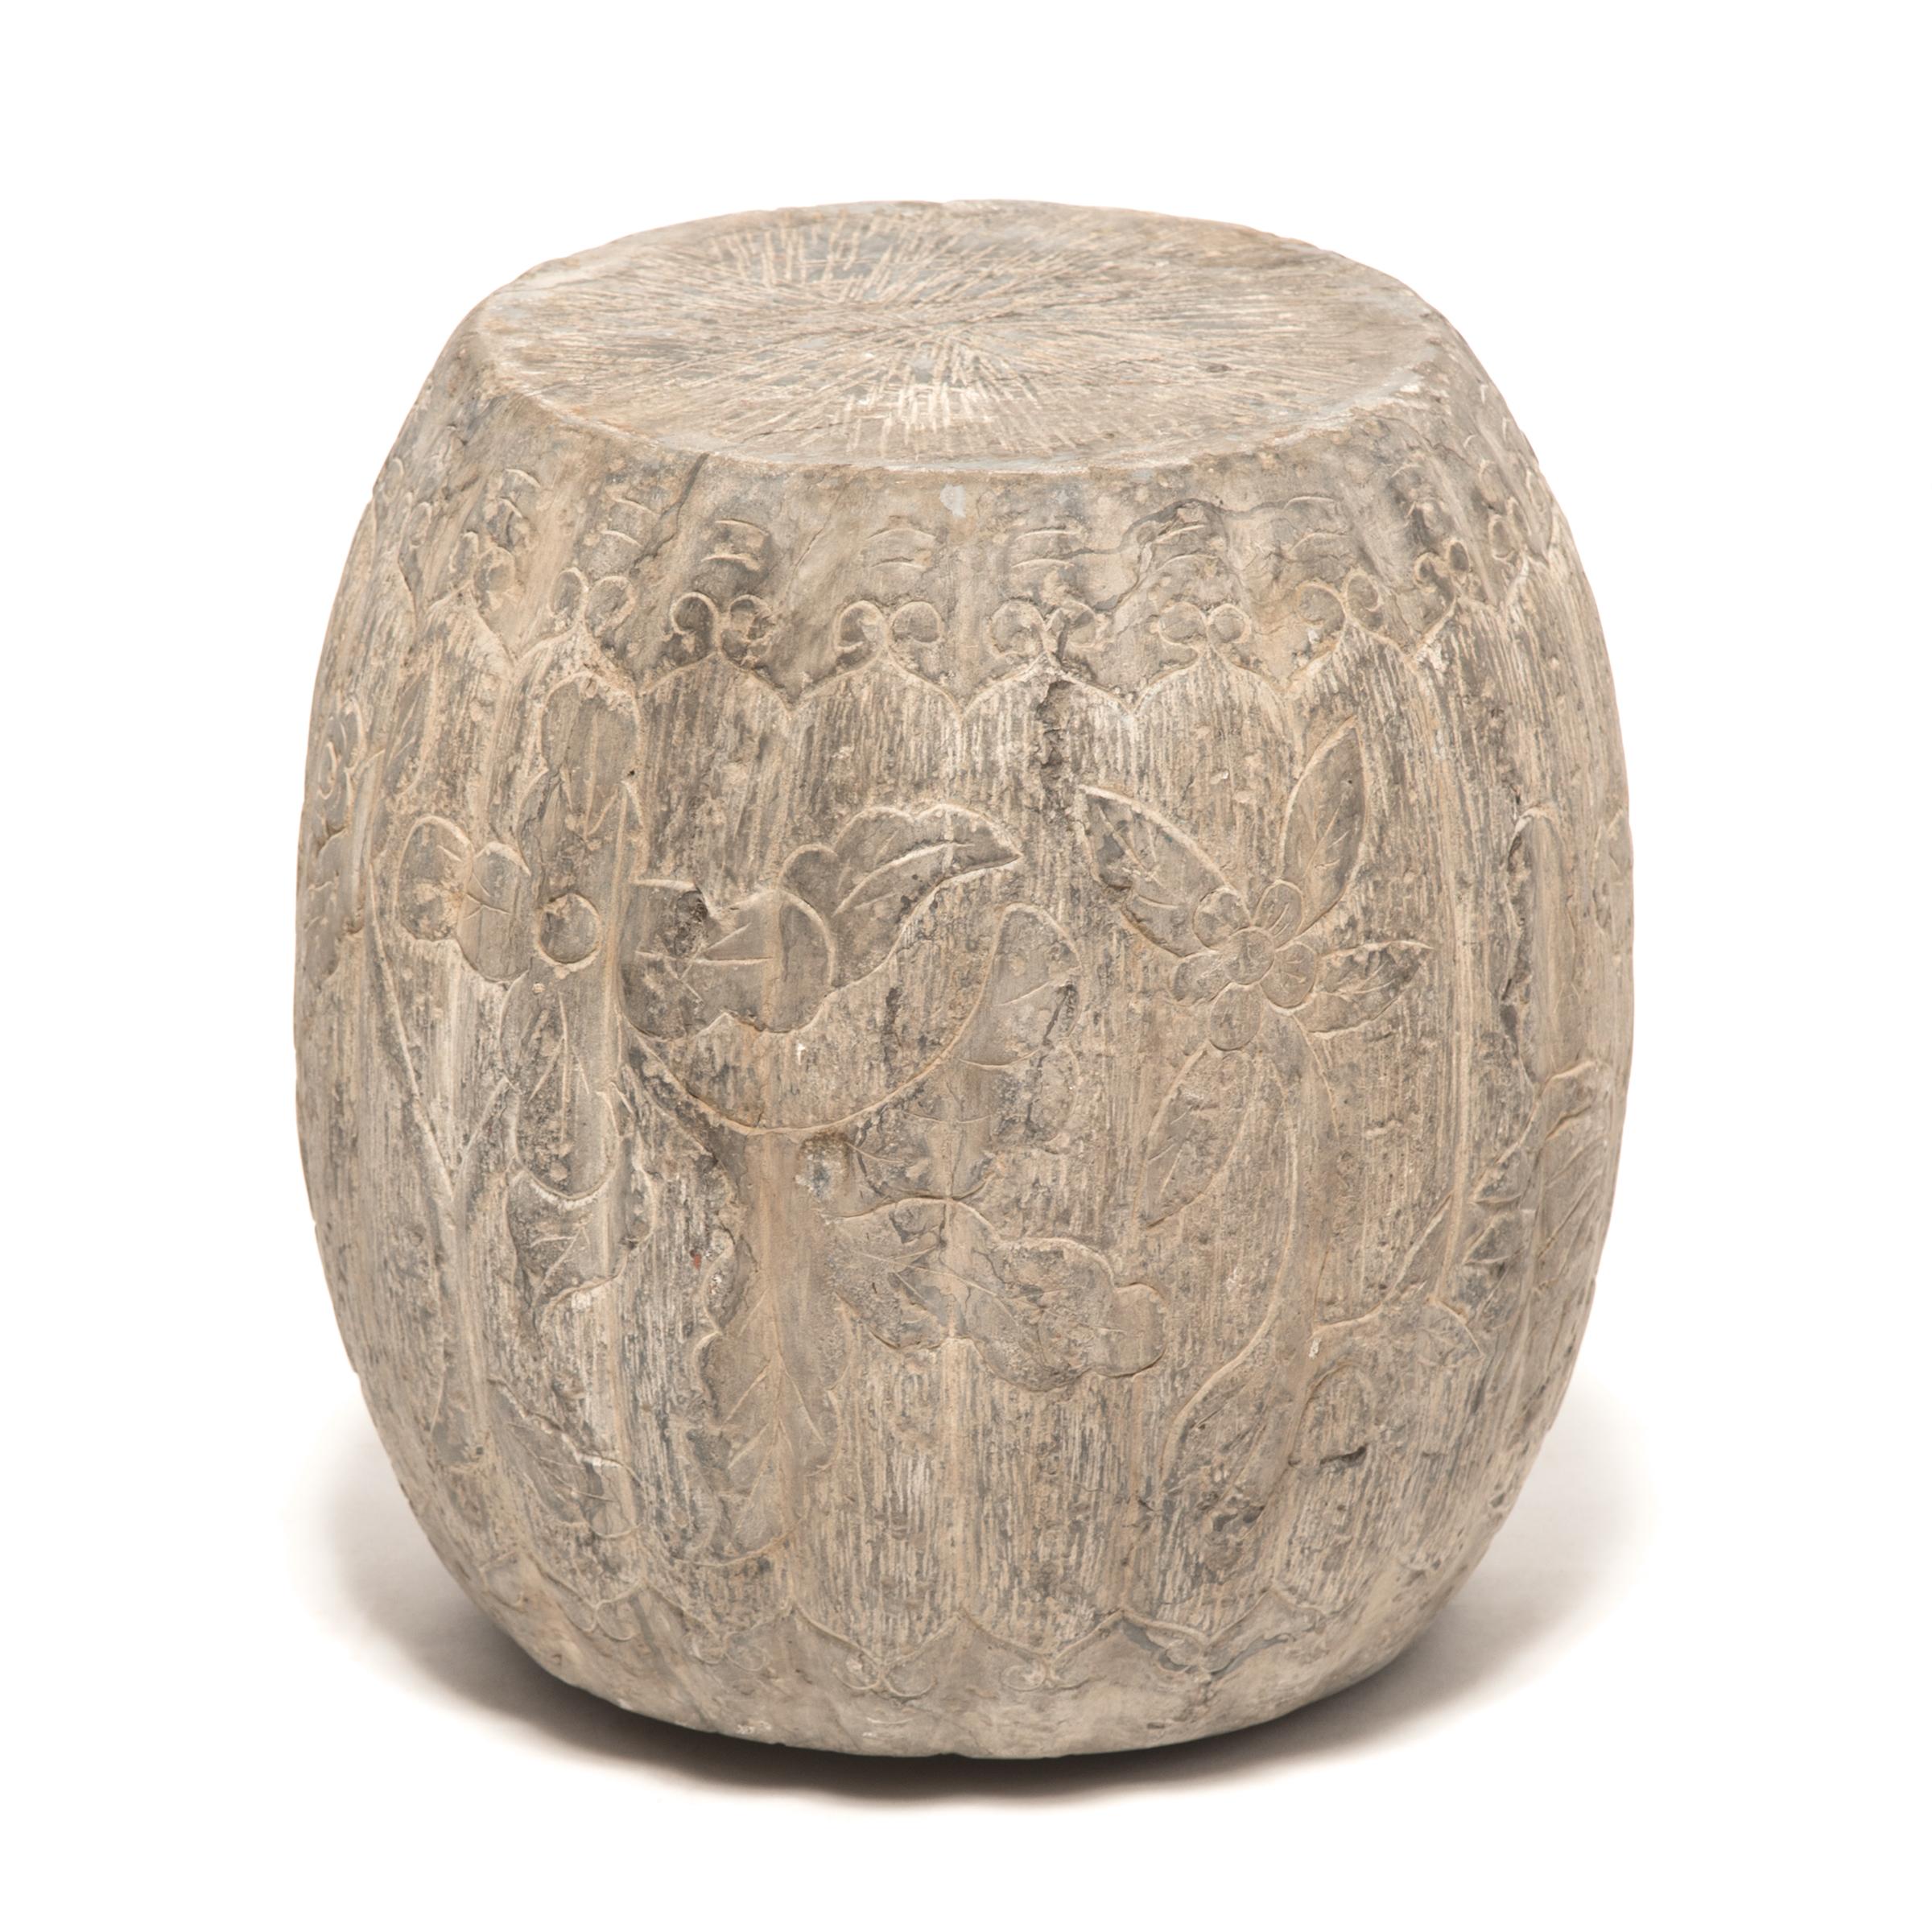 This pair of drum form stools were hand-carved from solid limestone by an artisan in China’s Shanxi province in the late 19th-century. Sculpted to a ridged melon shape, a traditional Chinese symbol of fertility, each drum is incised with trailing